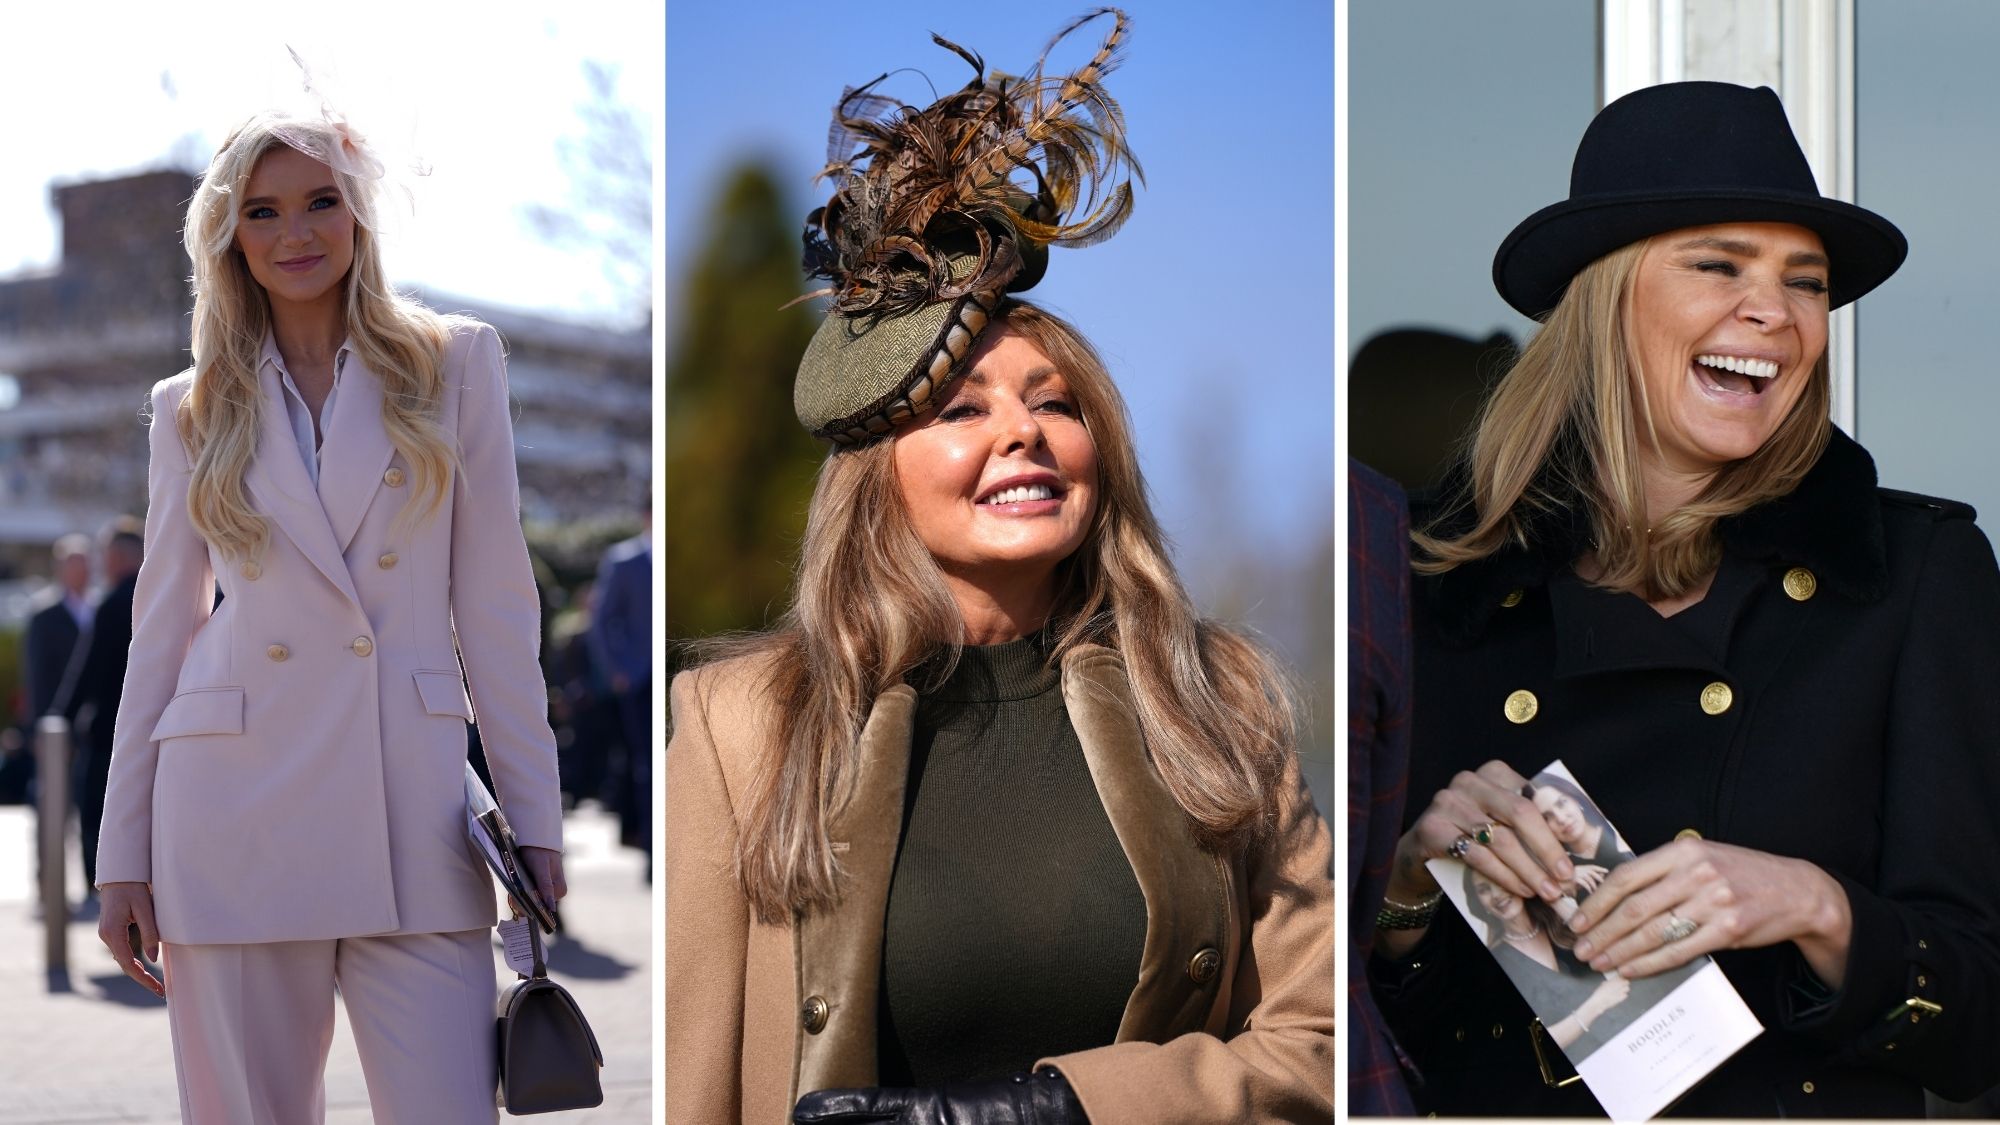 The celebrities spotted at Cheltenham Festival 2022 on Gold Cup